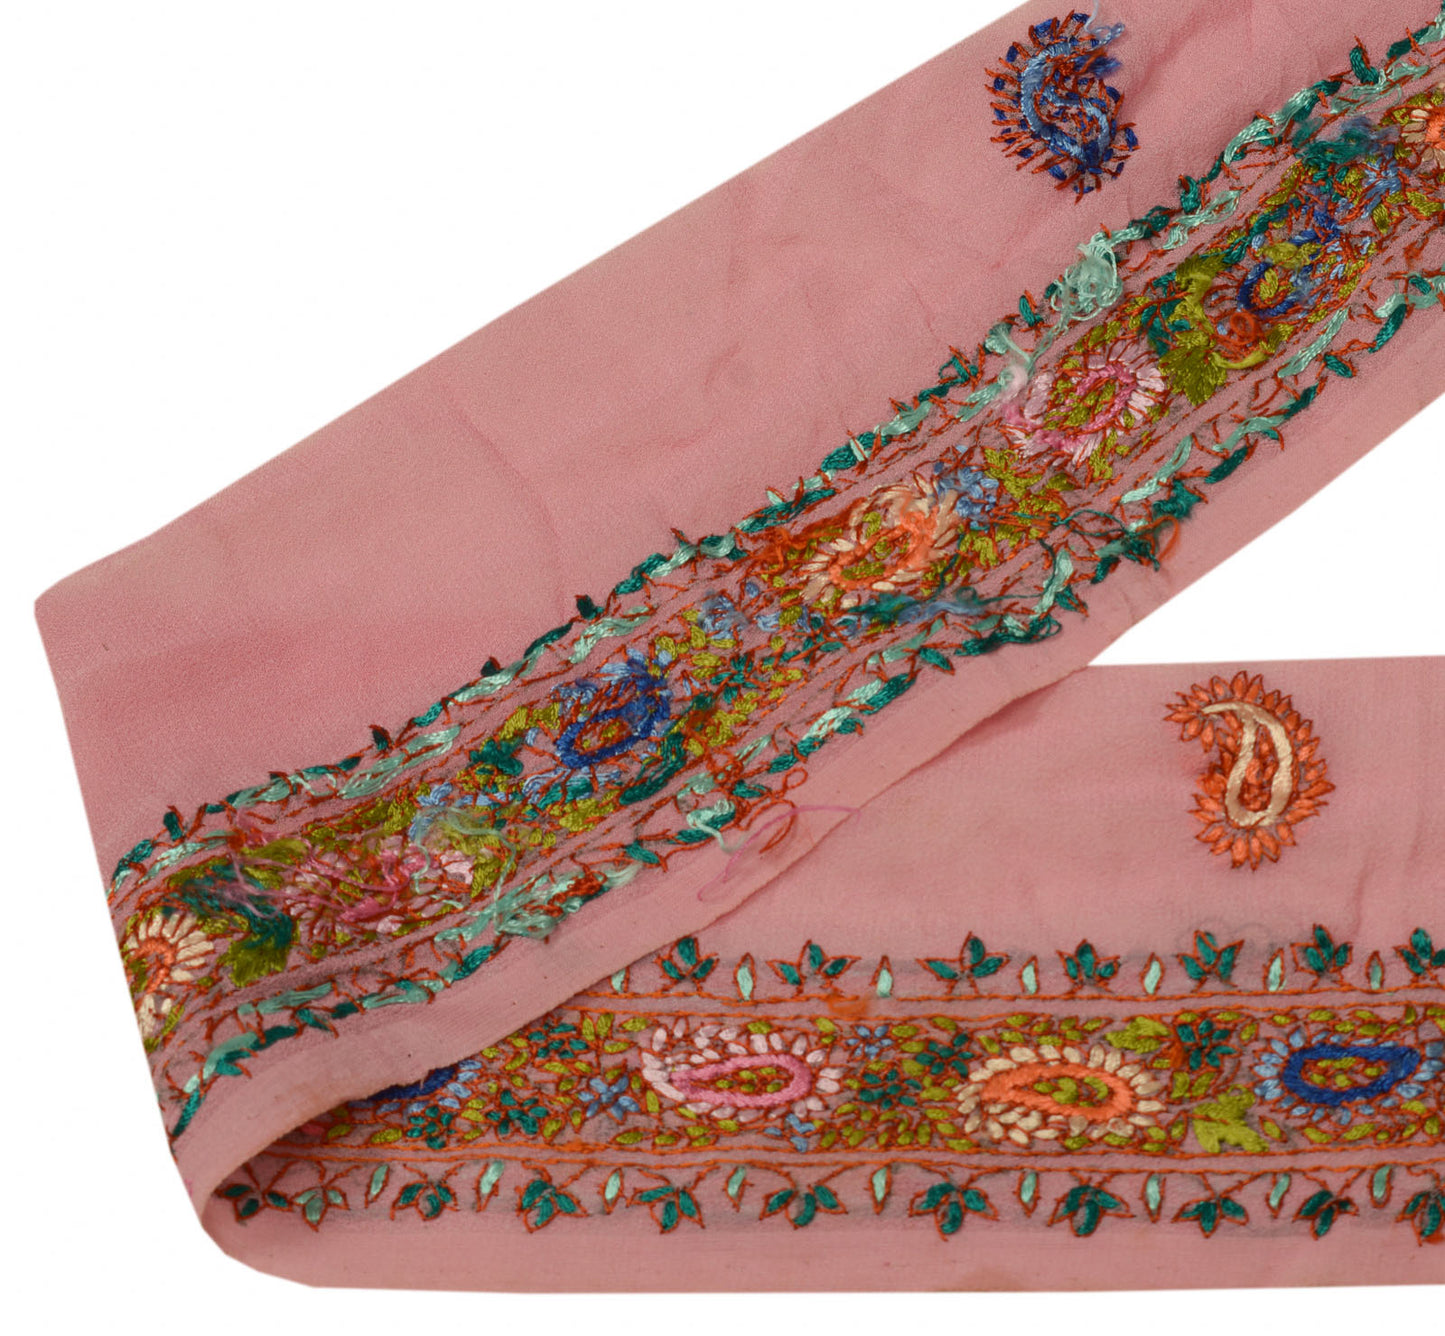 Sushila Vintage Pink Saree Border Indian Craft Sewing Trim Hand Embroidered Lace